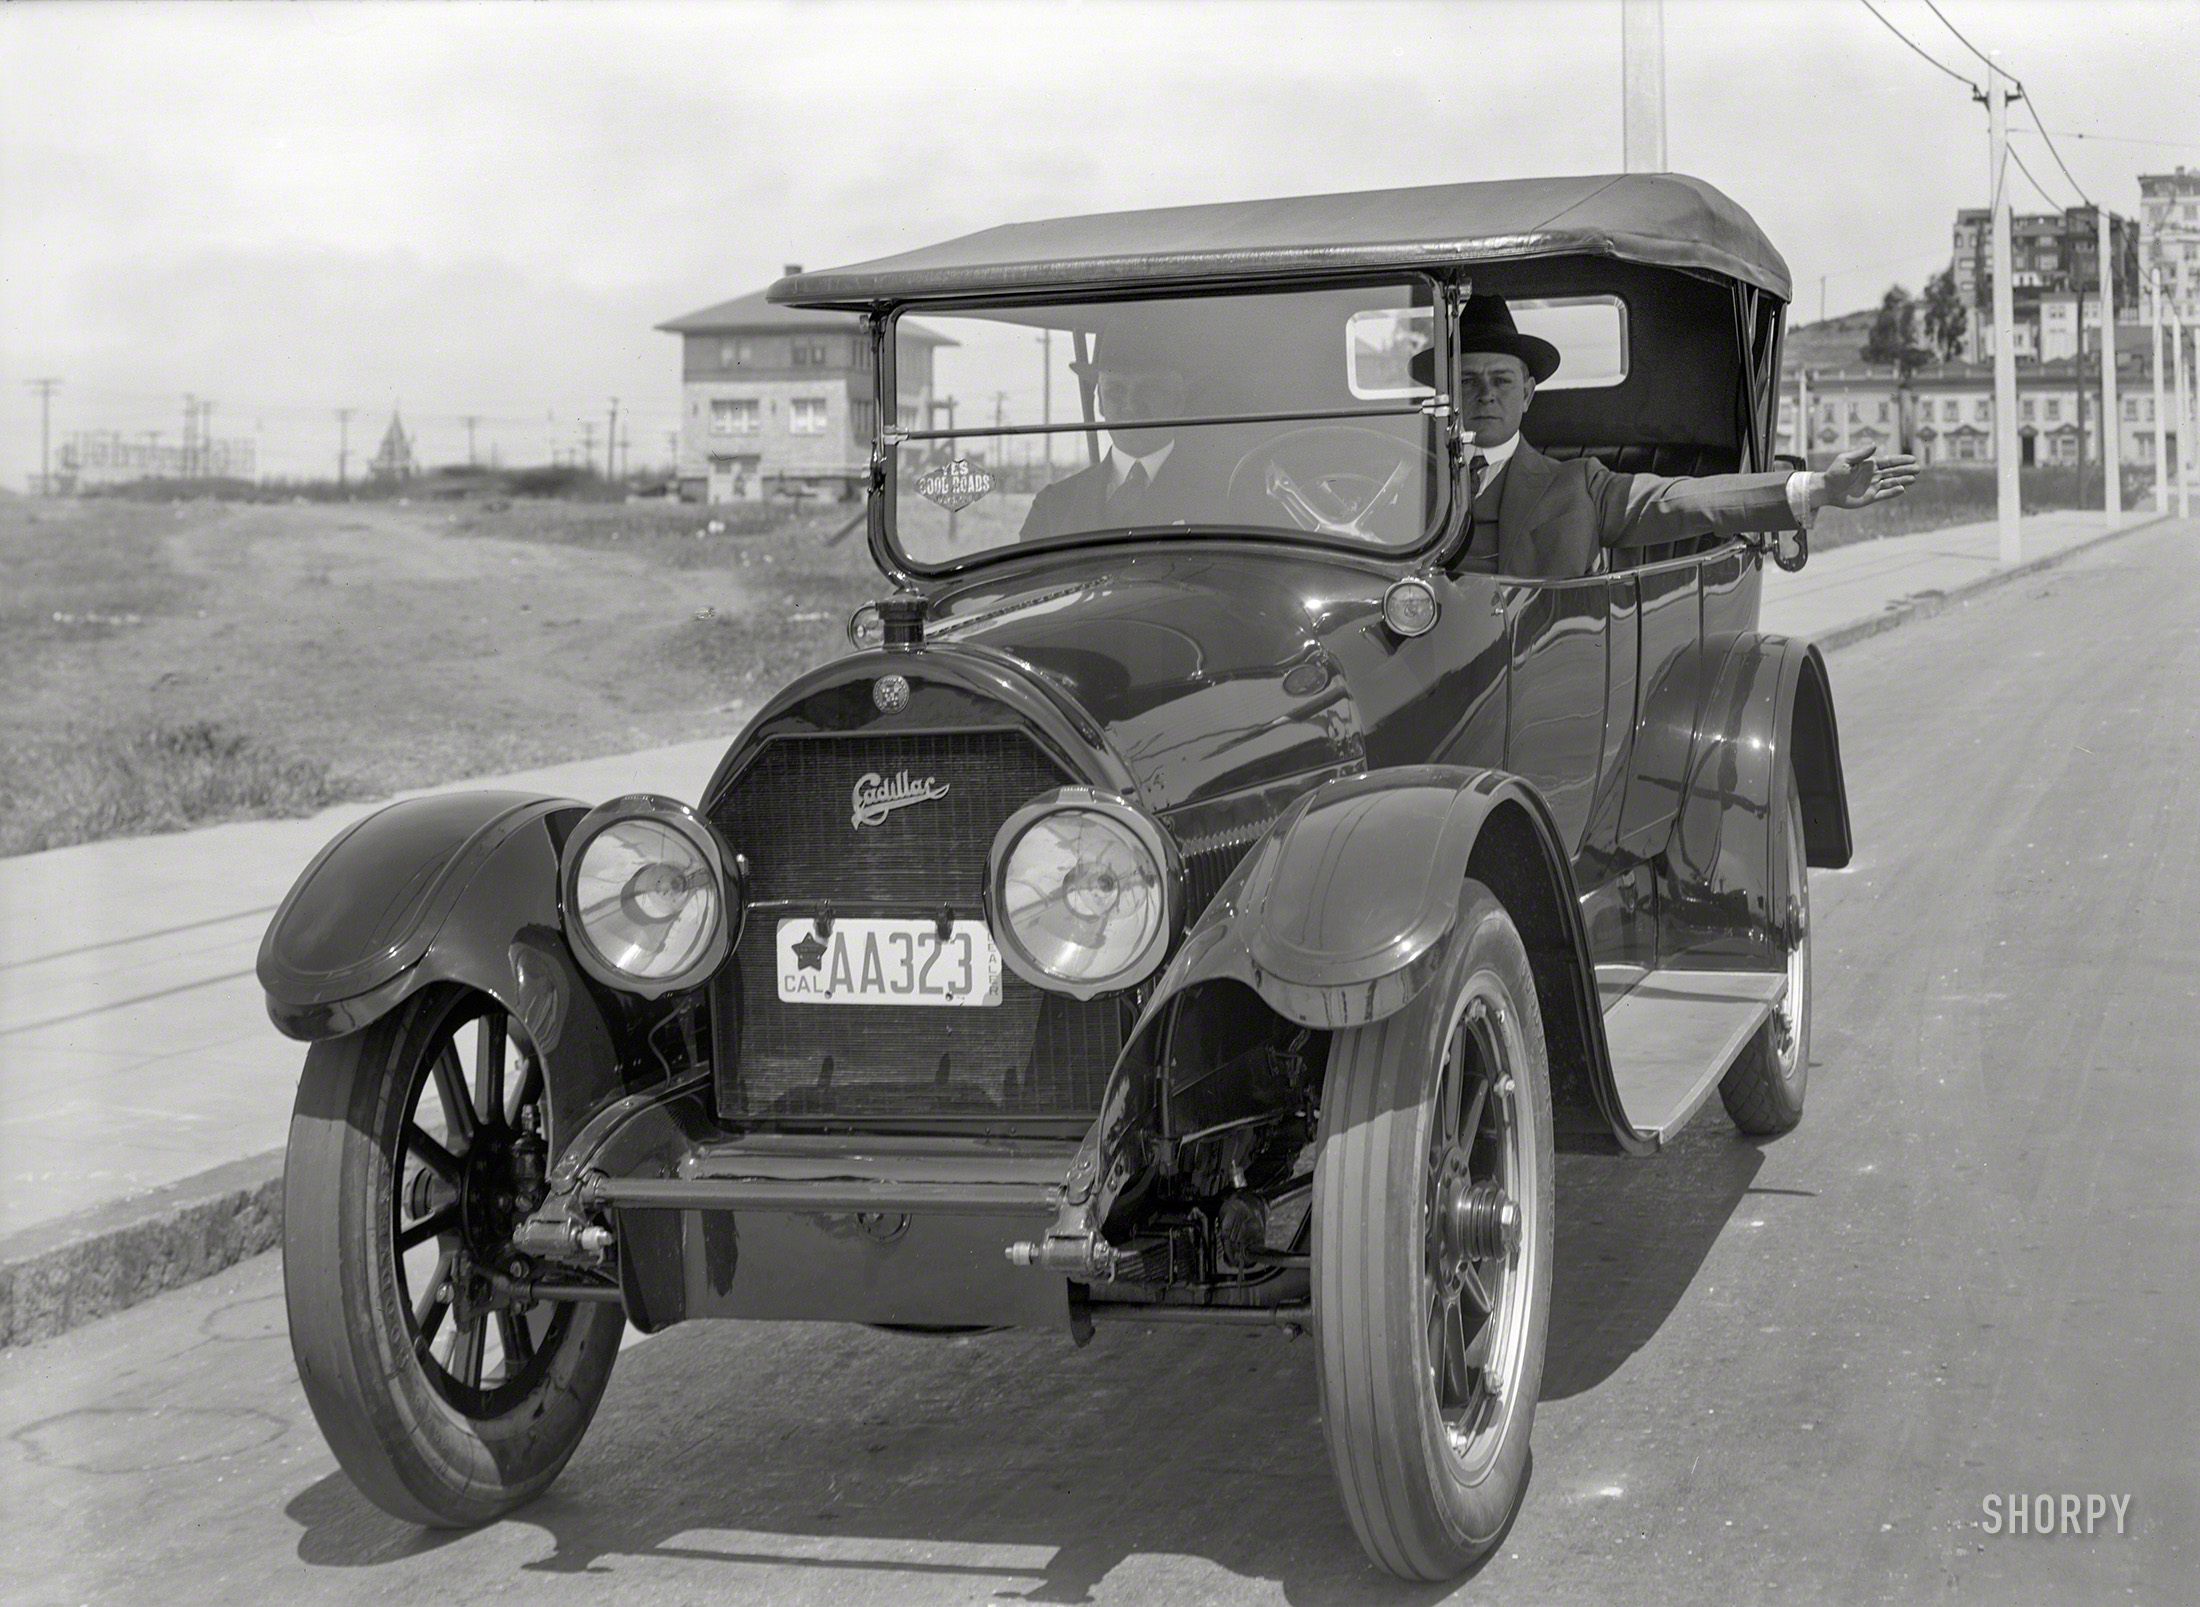 San Francisco, 1919. "Cadillac touring car at marina." Putting rubber to the road with a variety of treads. 5x7 glass negative by Christopher Helin. View full size.